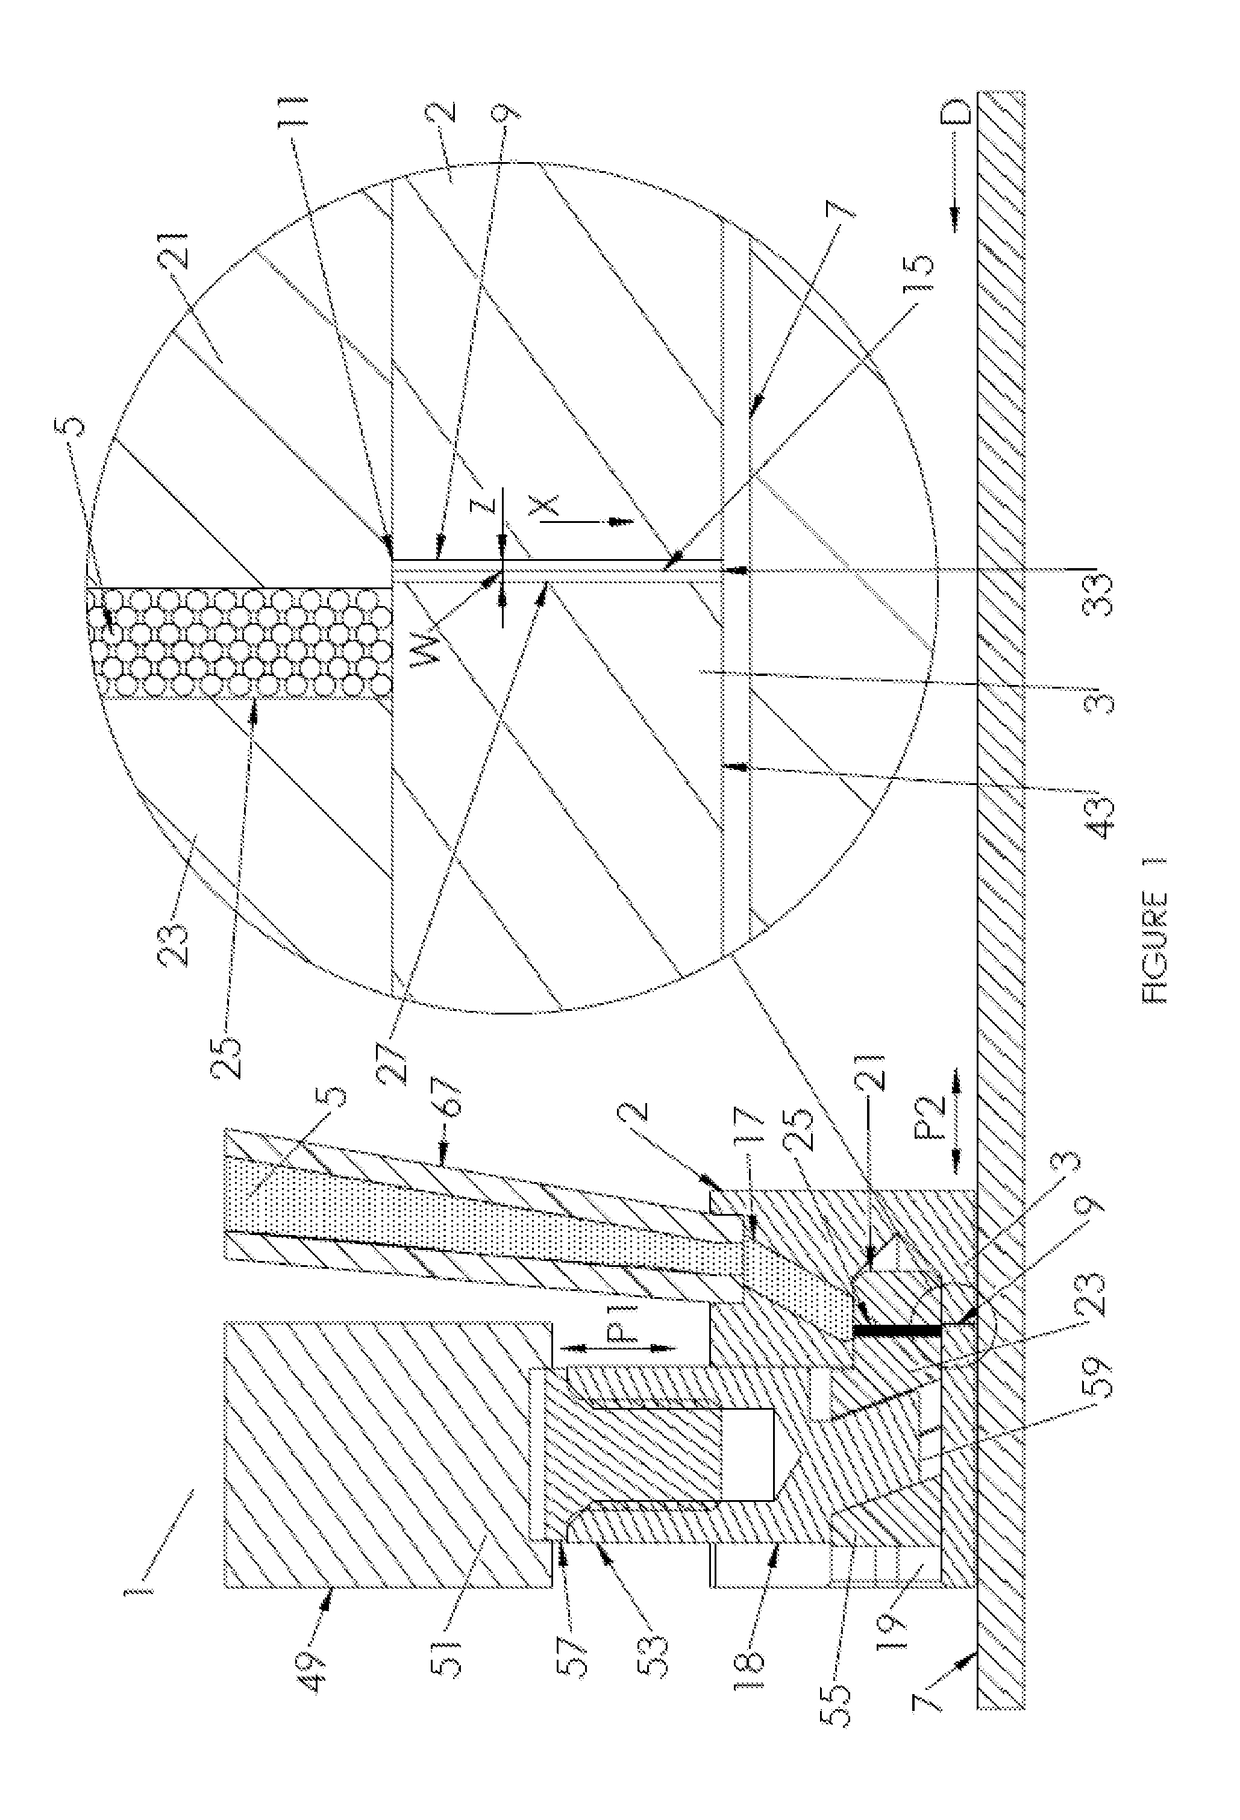 A Three Dimensional Printing Apparatus, a Material Dispensing Unit Therefor and a Method